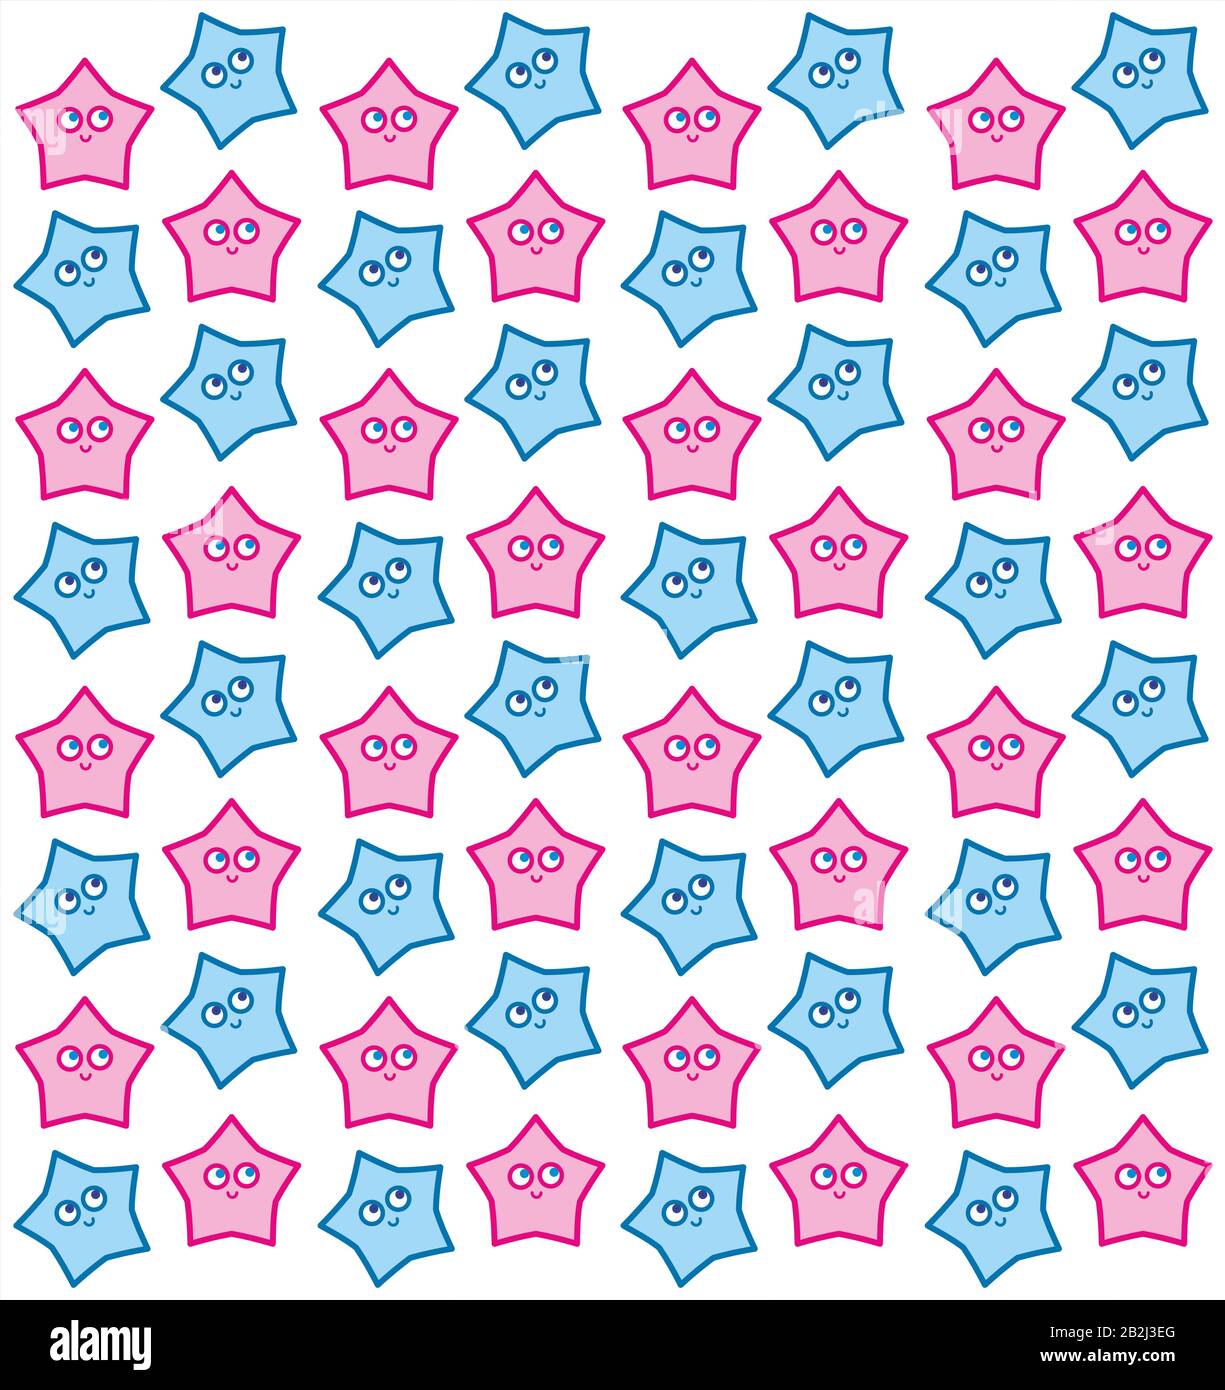 stars blue and pink with eyes, smile, on white background, wallpaper, fabric Stock Vector